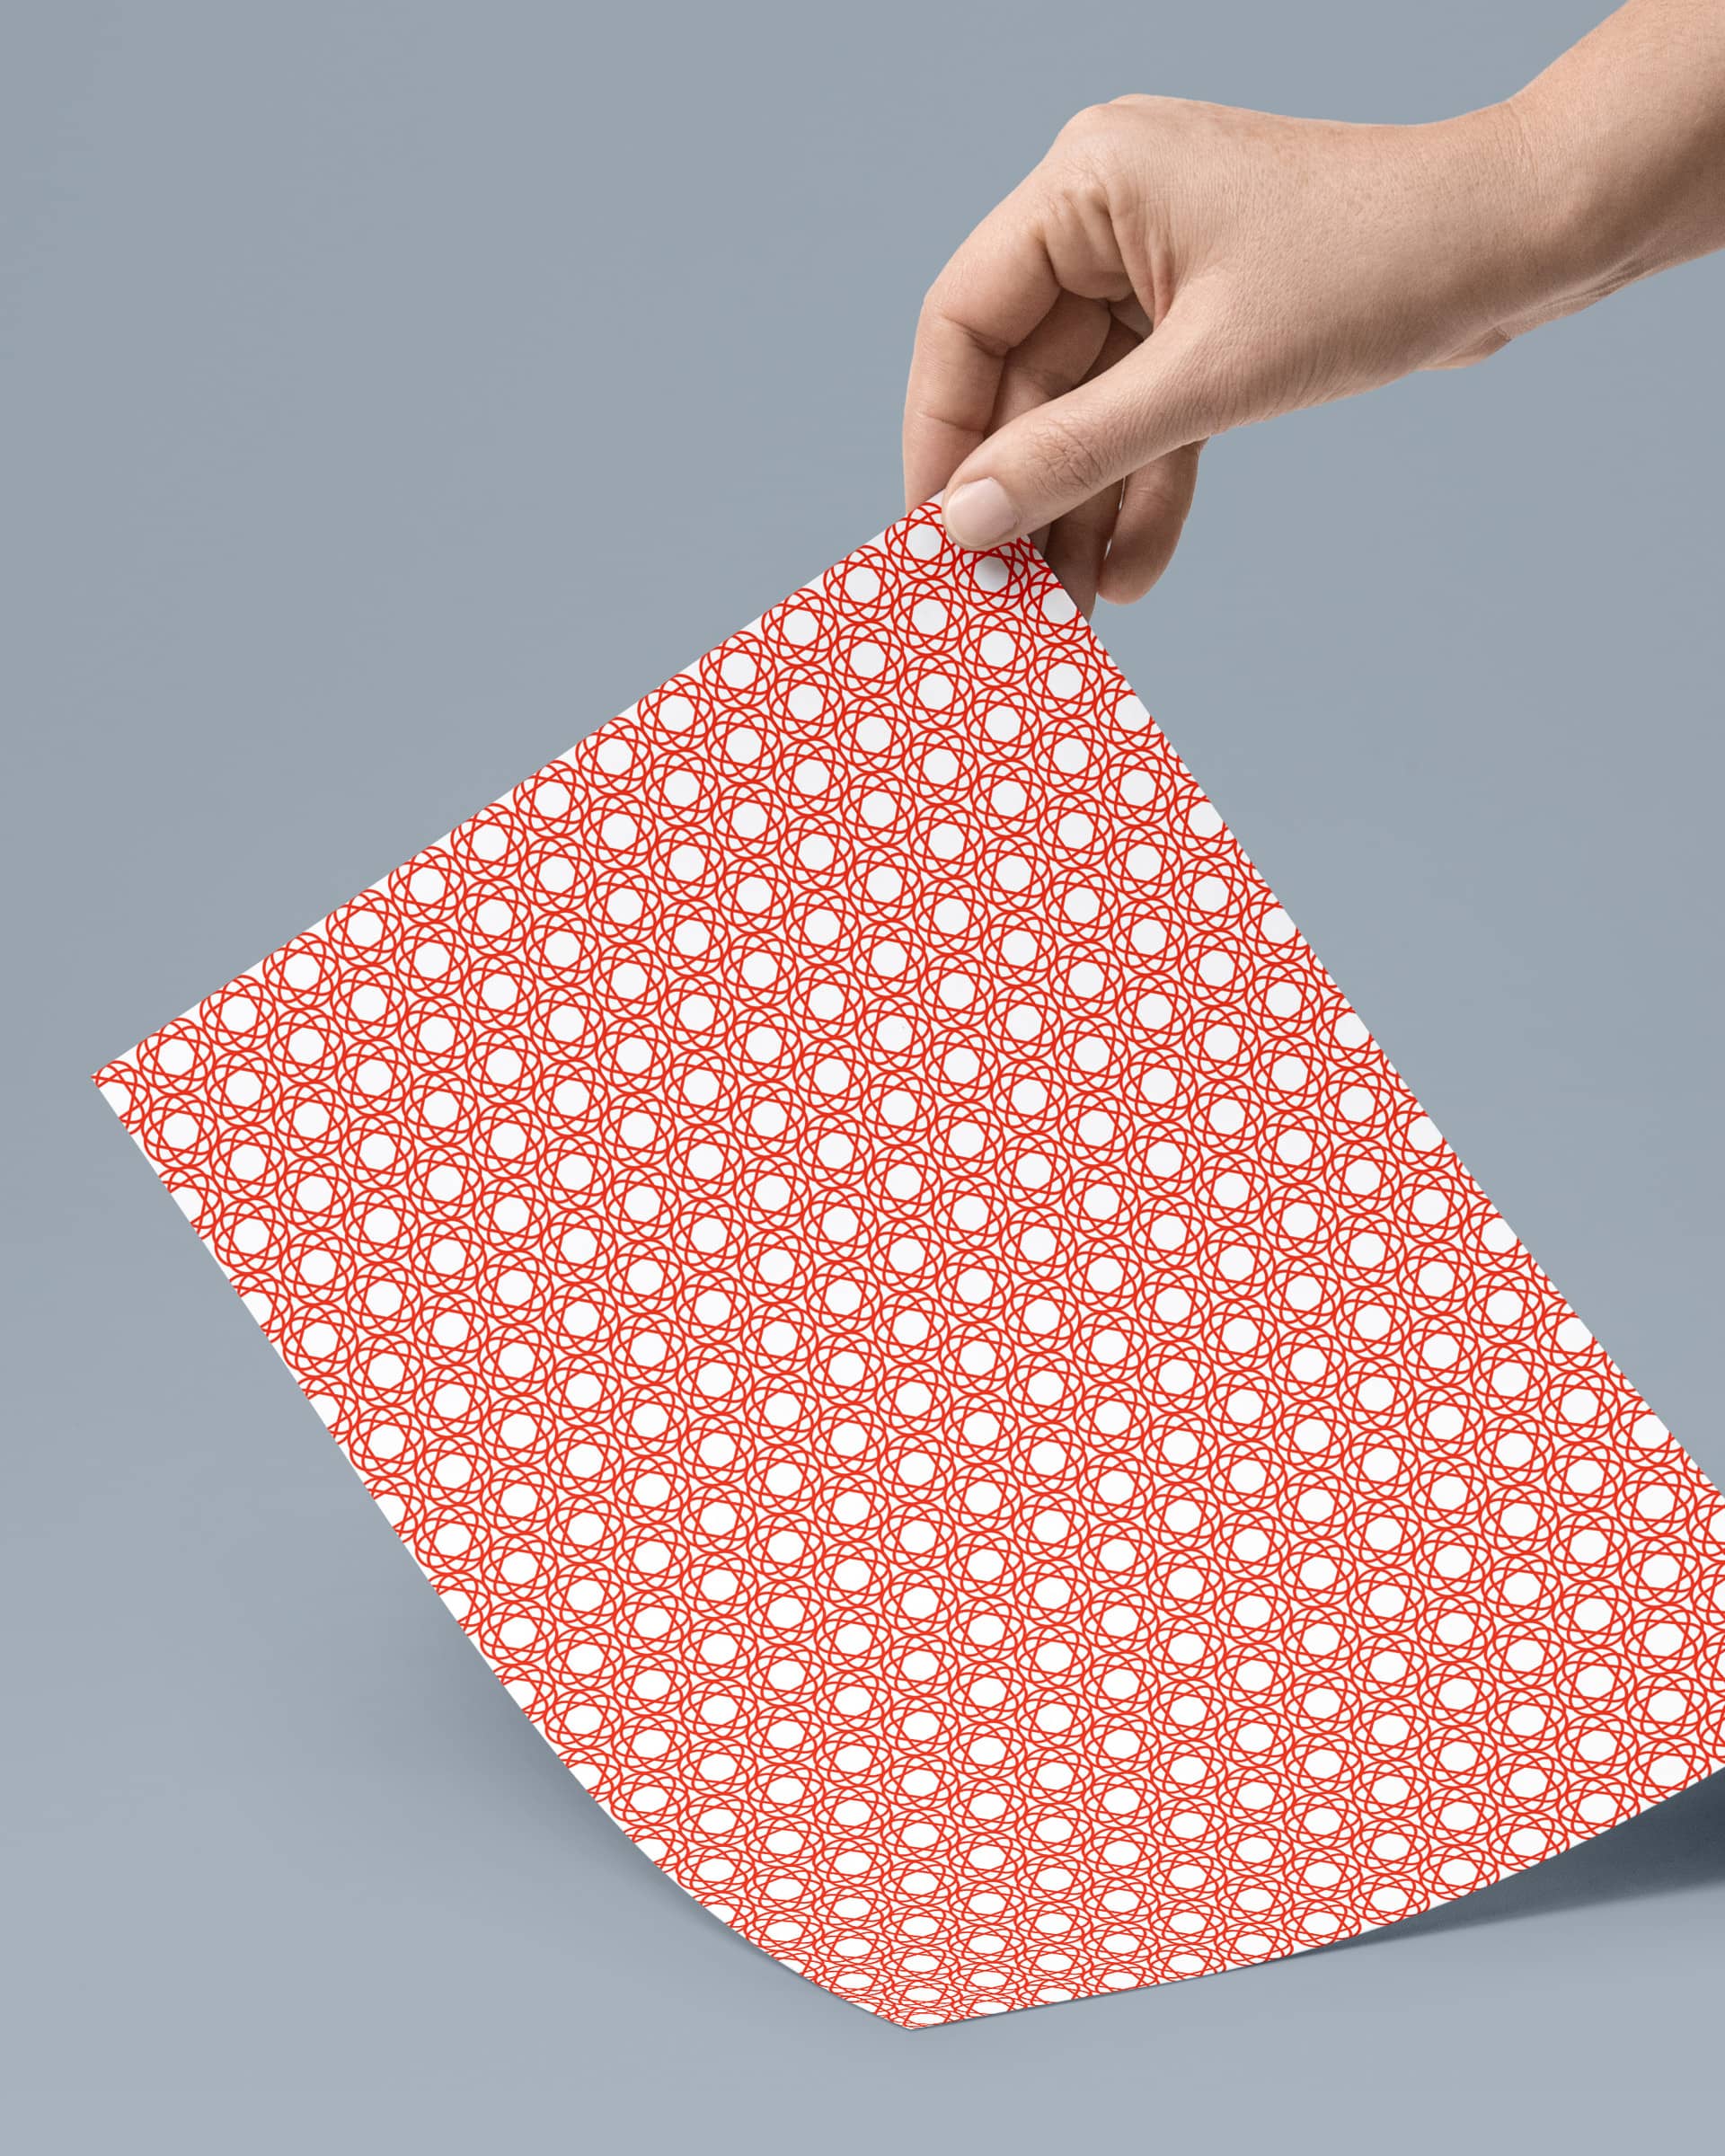 Red geometrical pattern design printed on paper